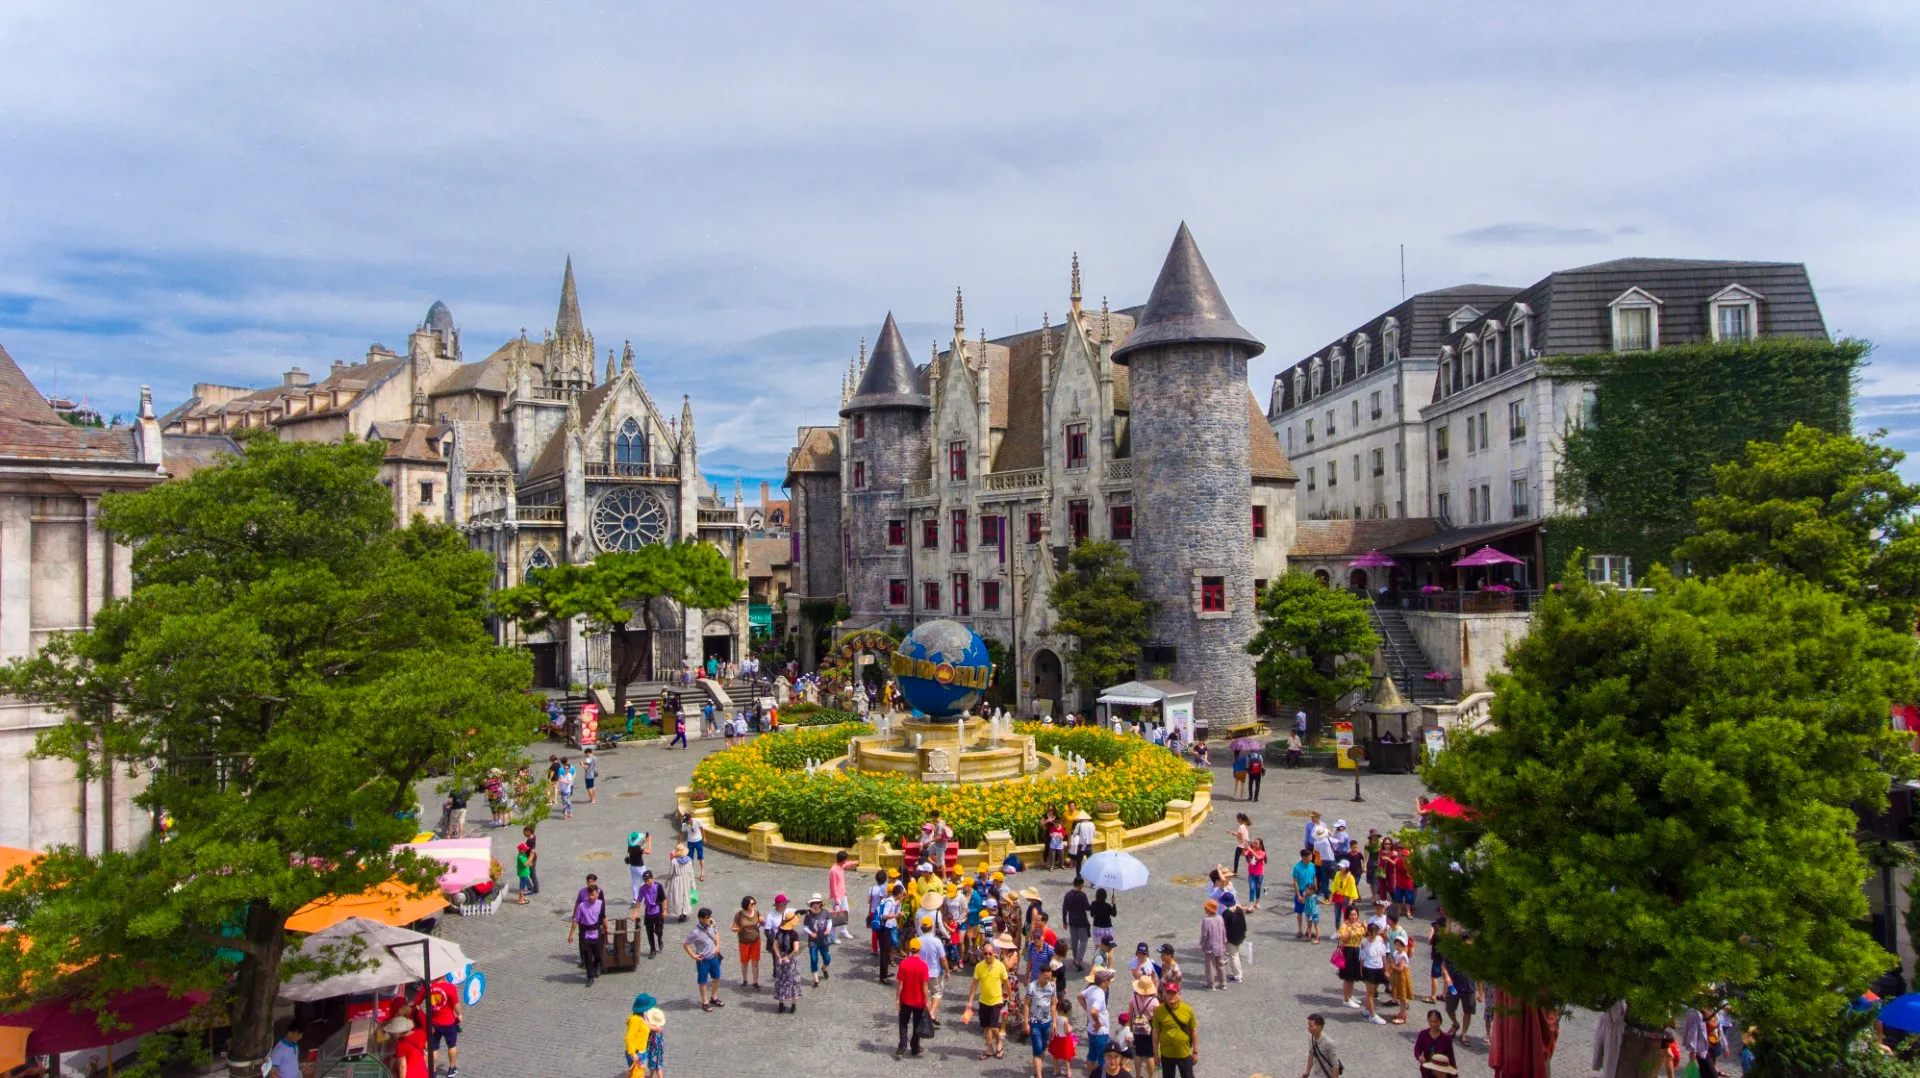 The French village is as beautiful as a "fairyland"